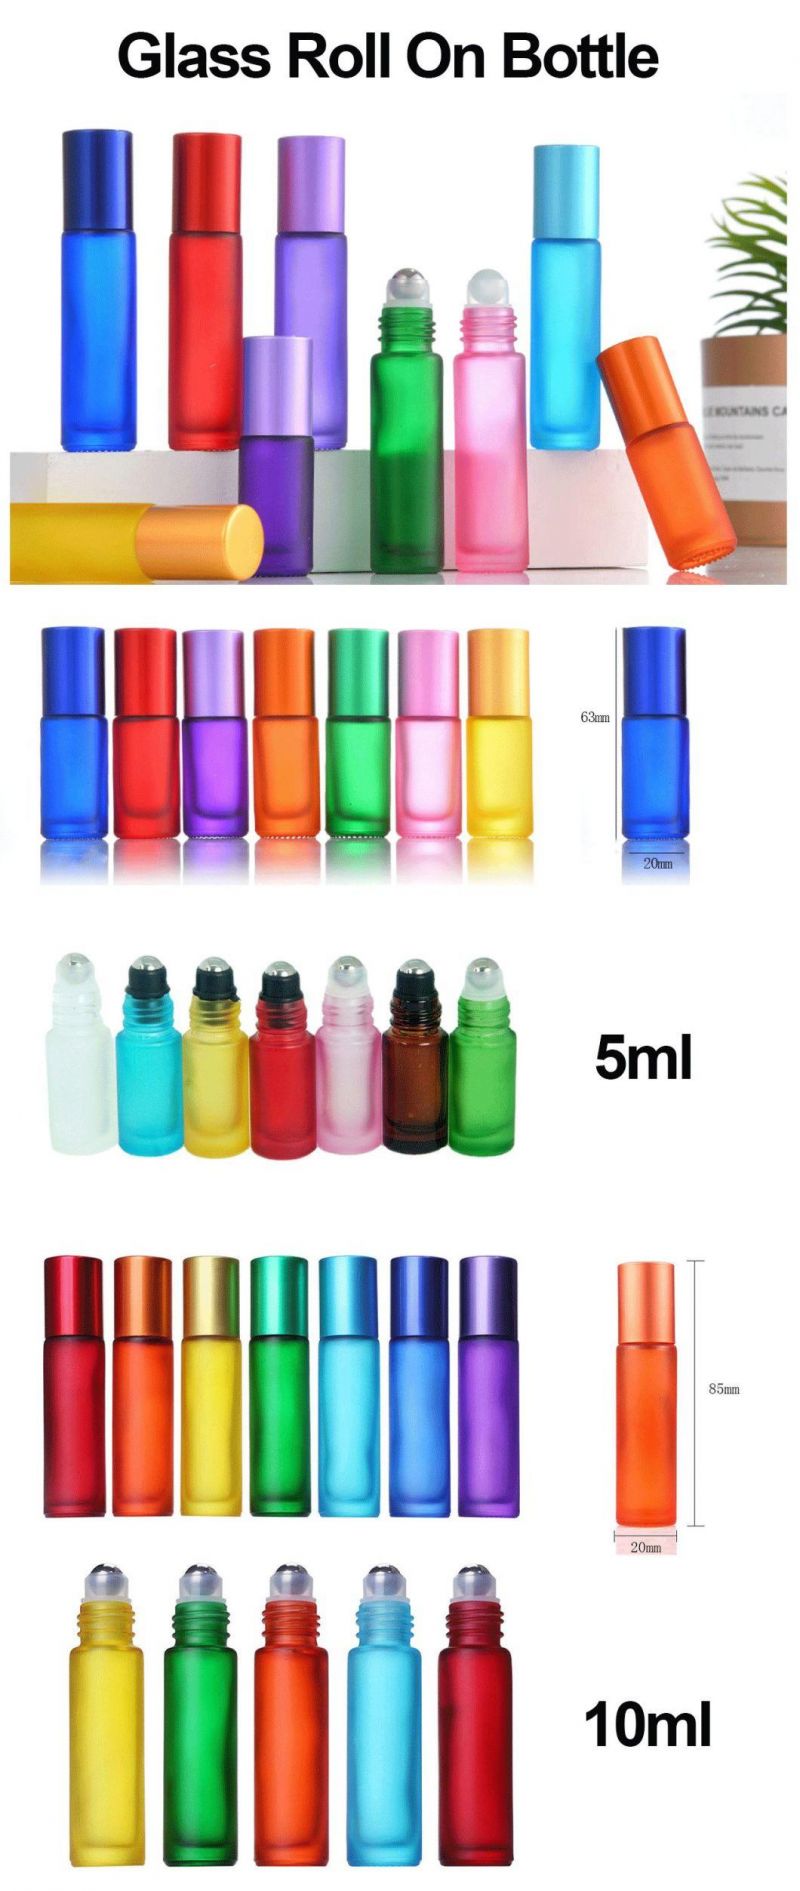 5ml 10ml Colorful Glass Perfume Roll on Bottle